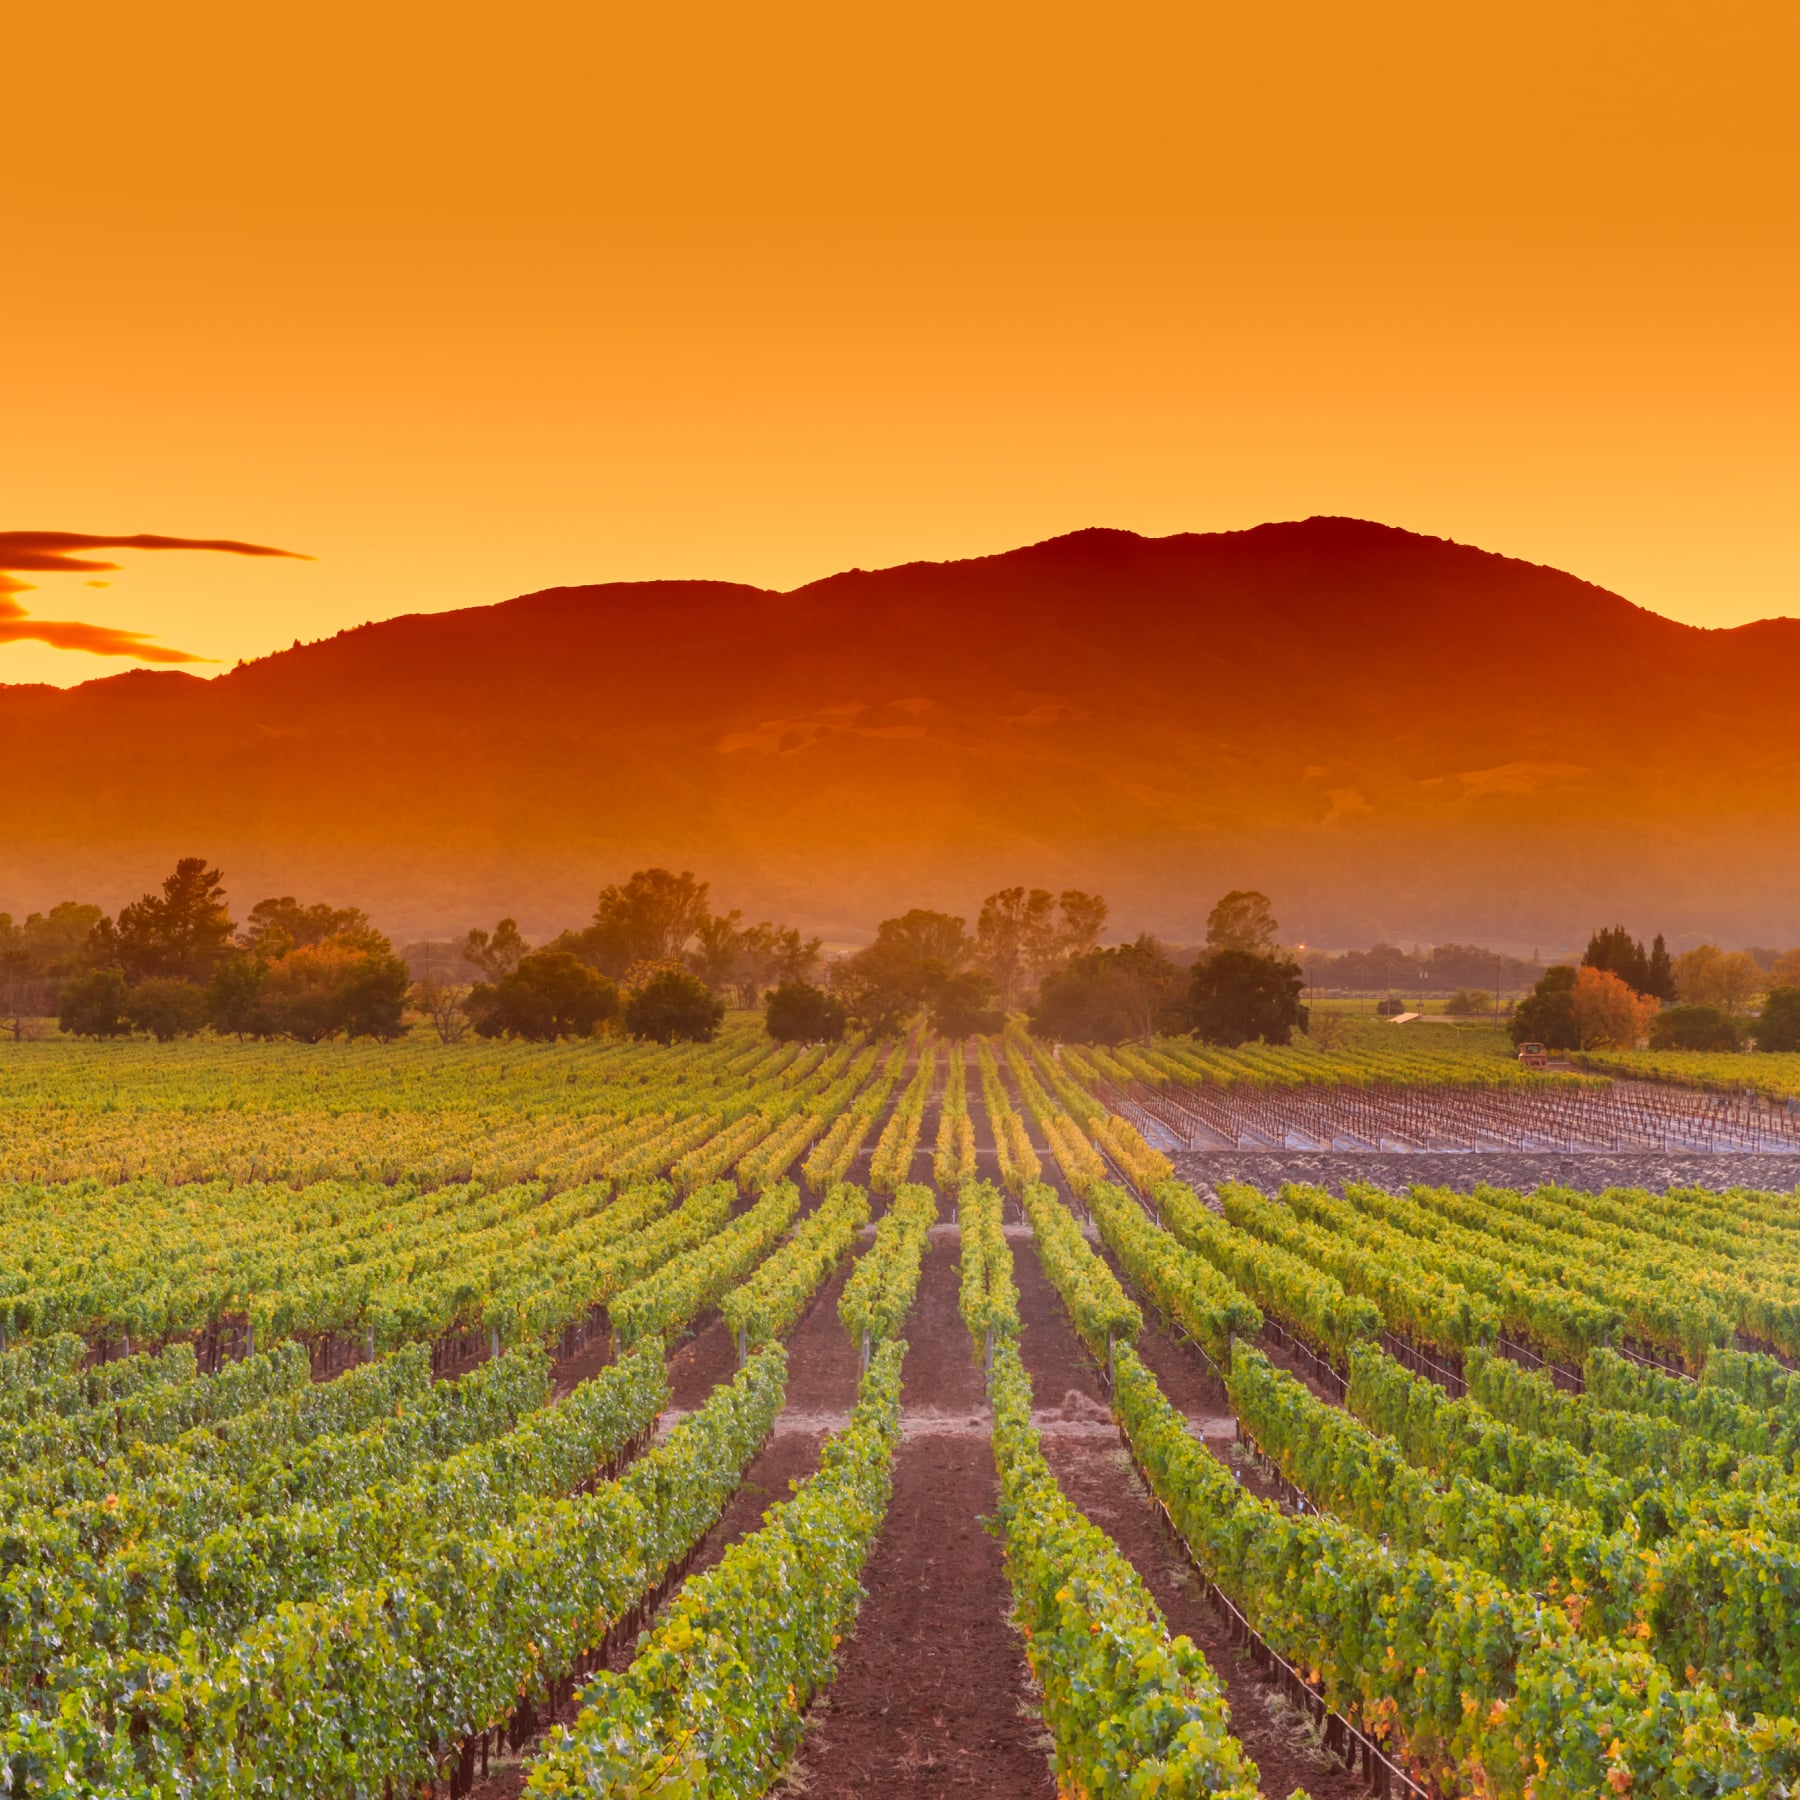 Napa is an ideal place for a wine tasting holiday